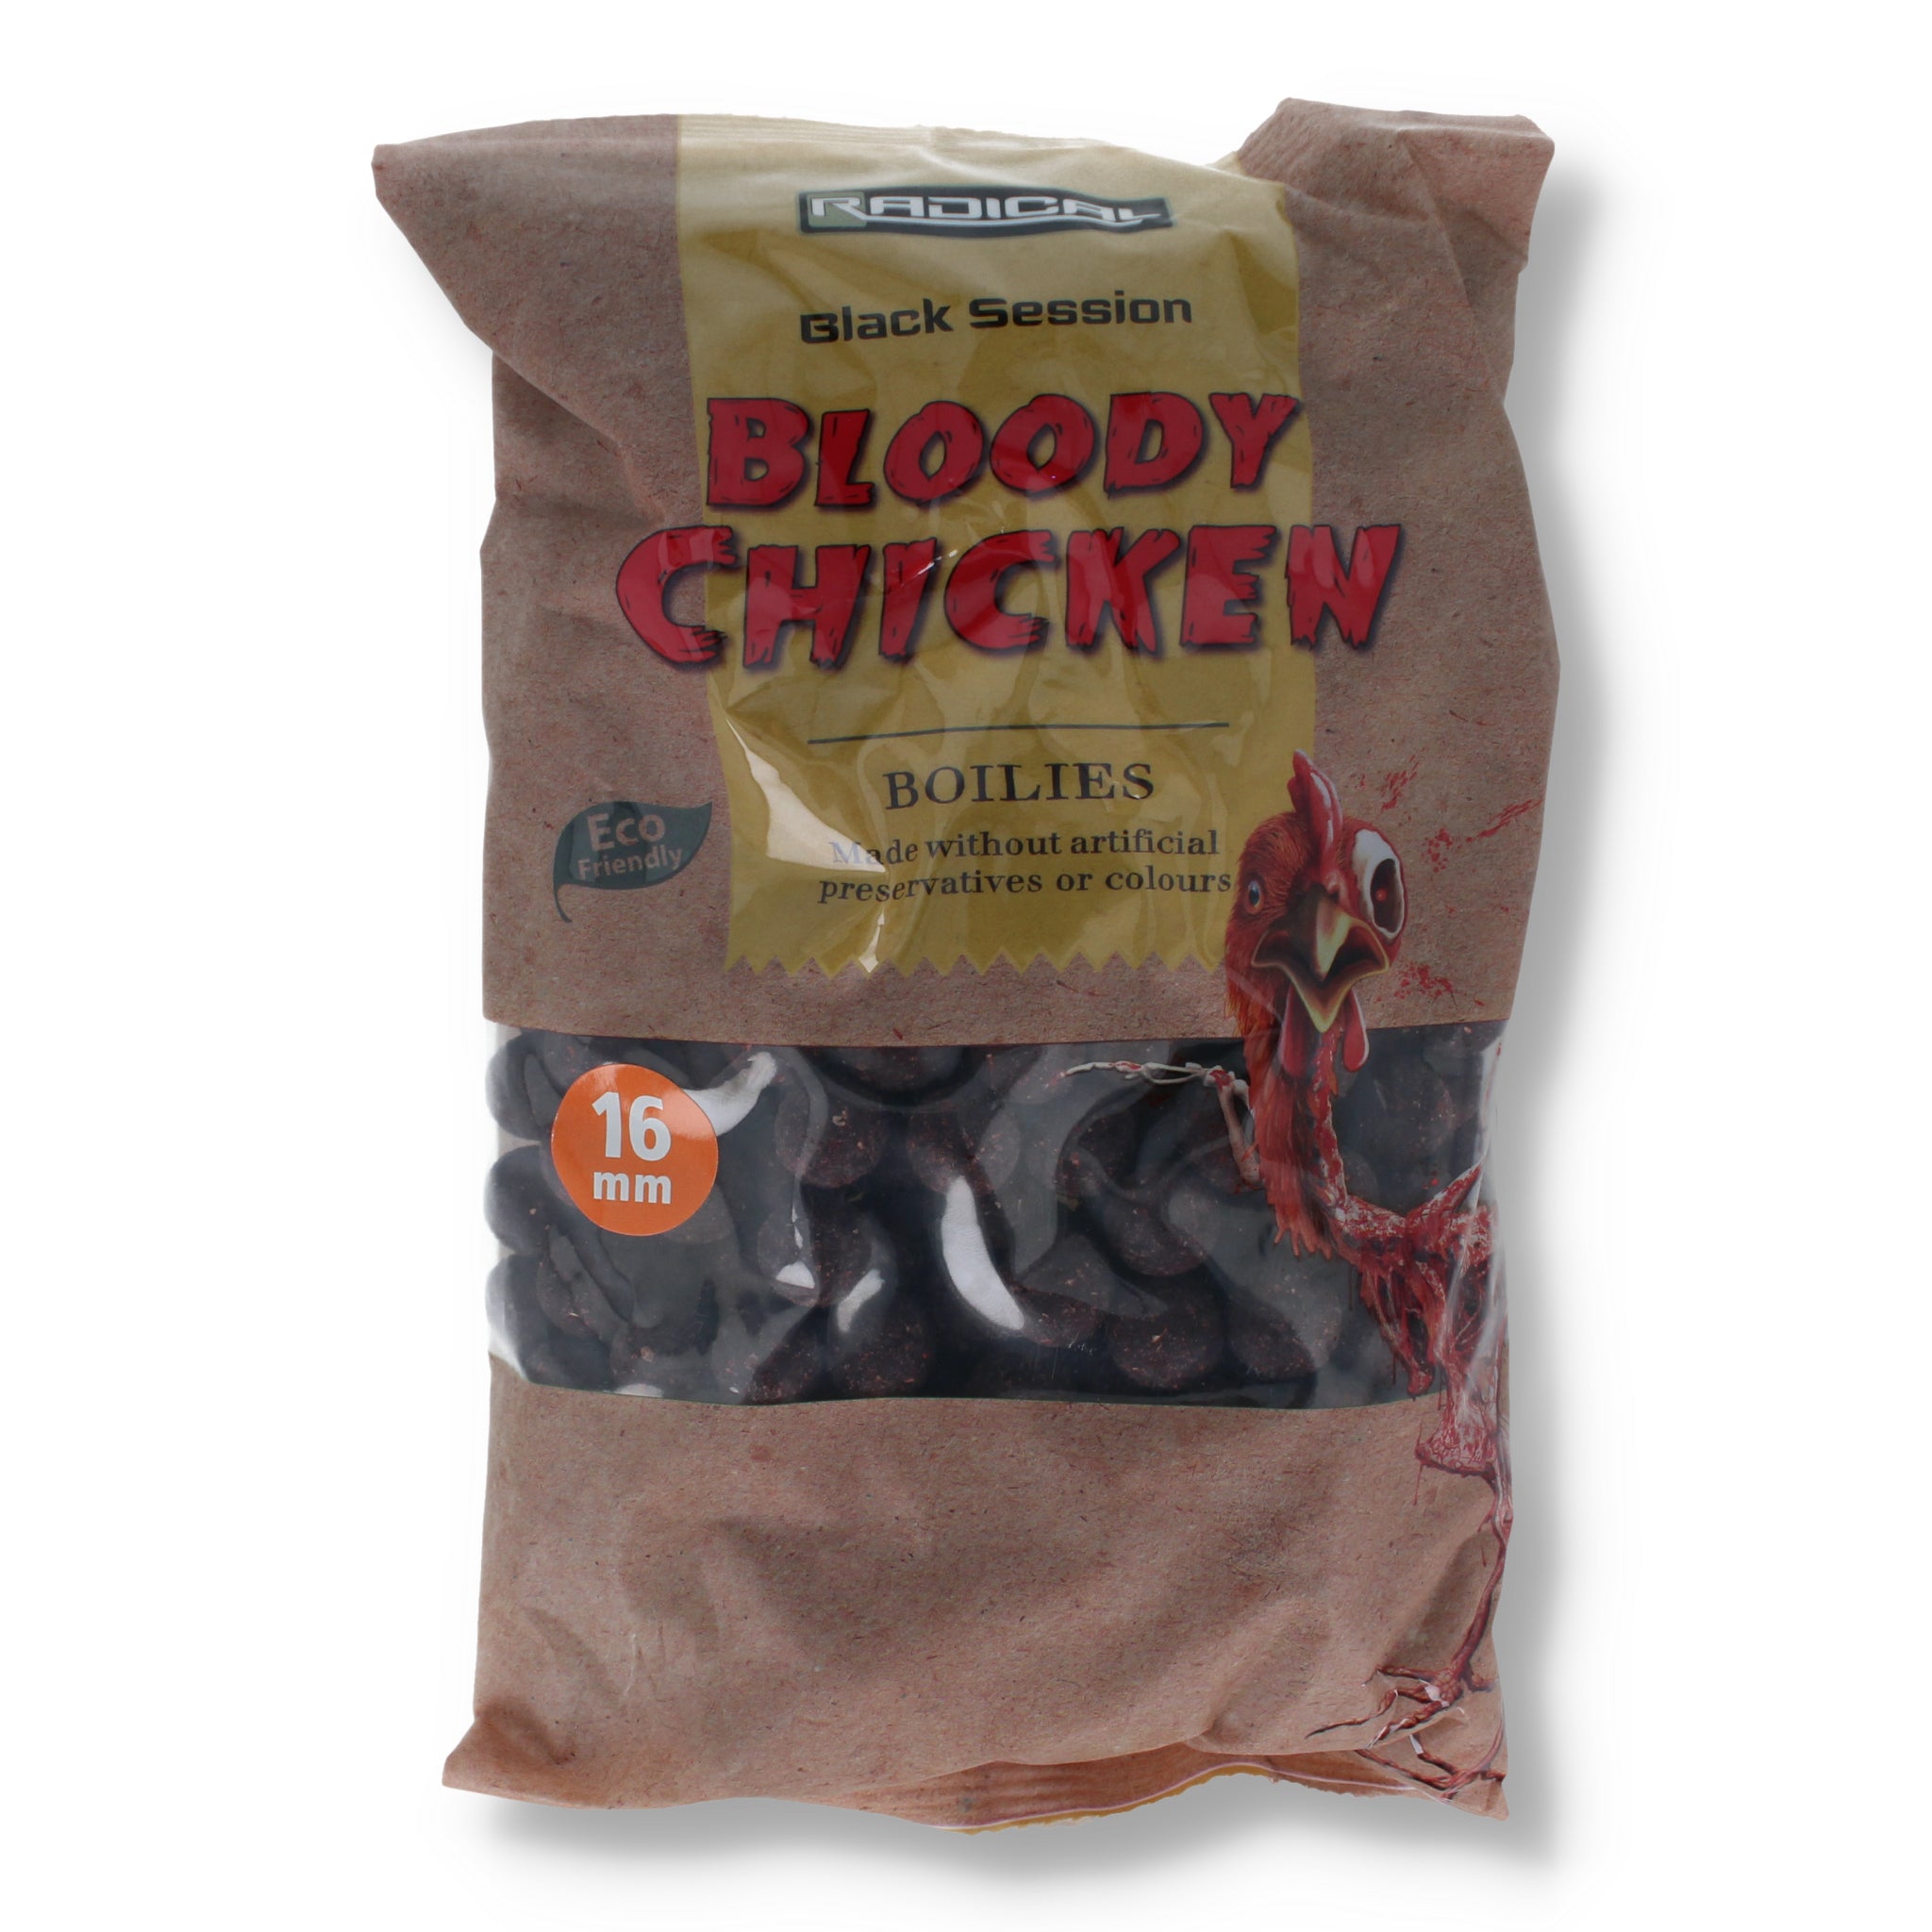 Radical Black Session Bloody Chicken Boilies 16mm